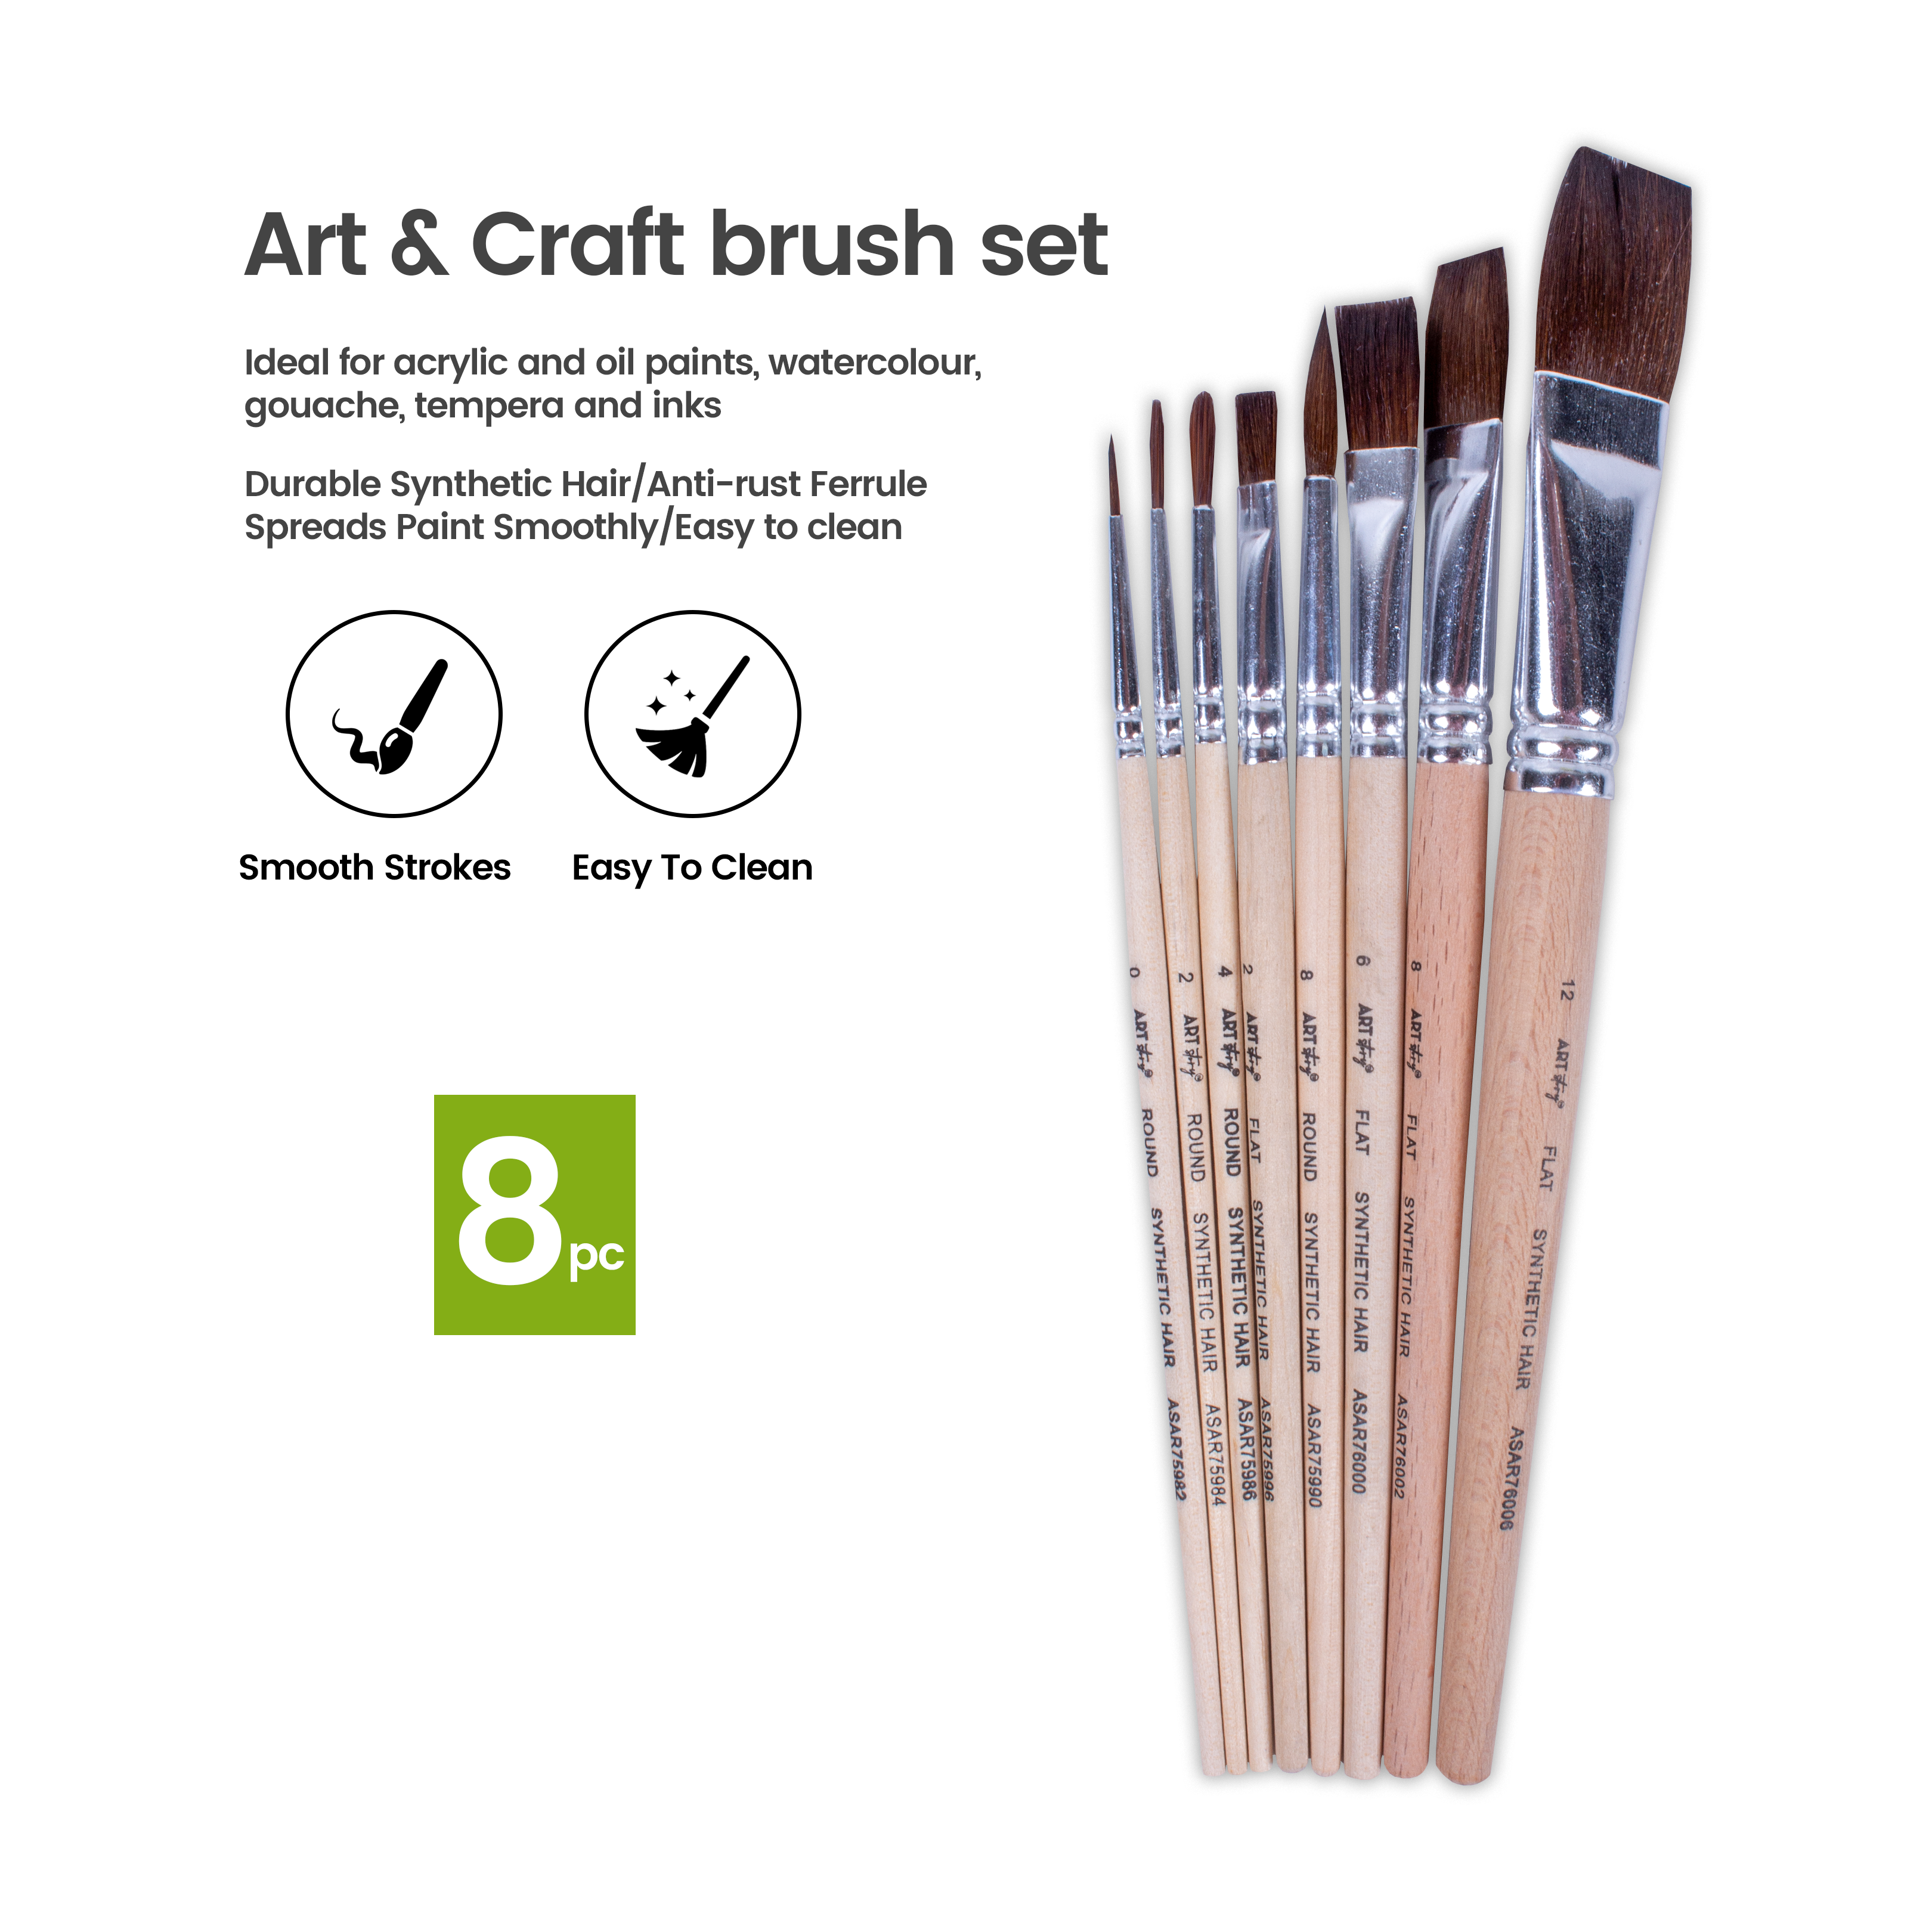 Watercolour Brush Round And Flat Synthetic Hair Size 0 2 4 8 And 2 6 8 12 8pc